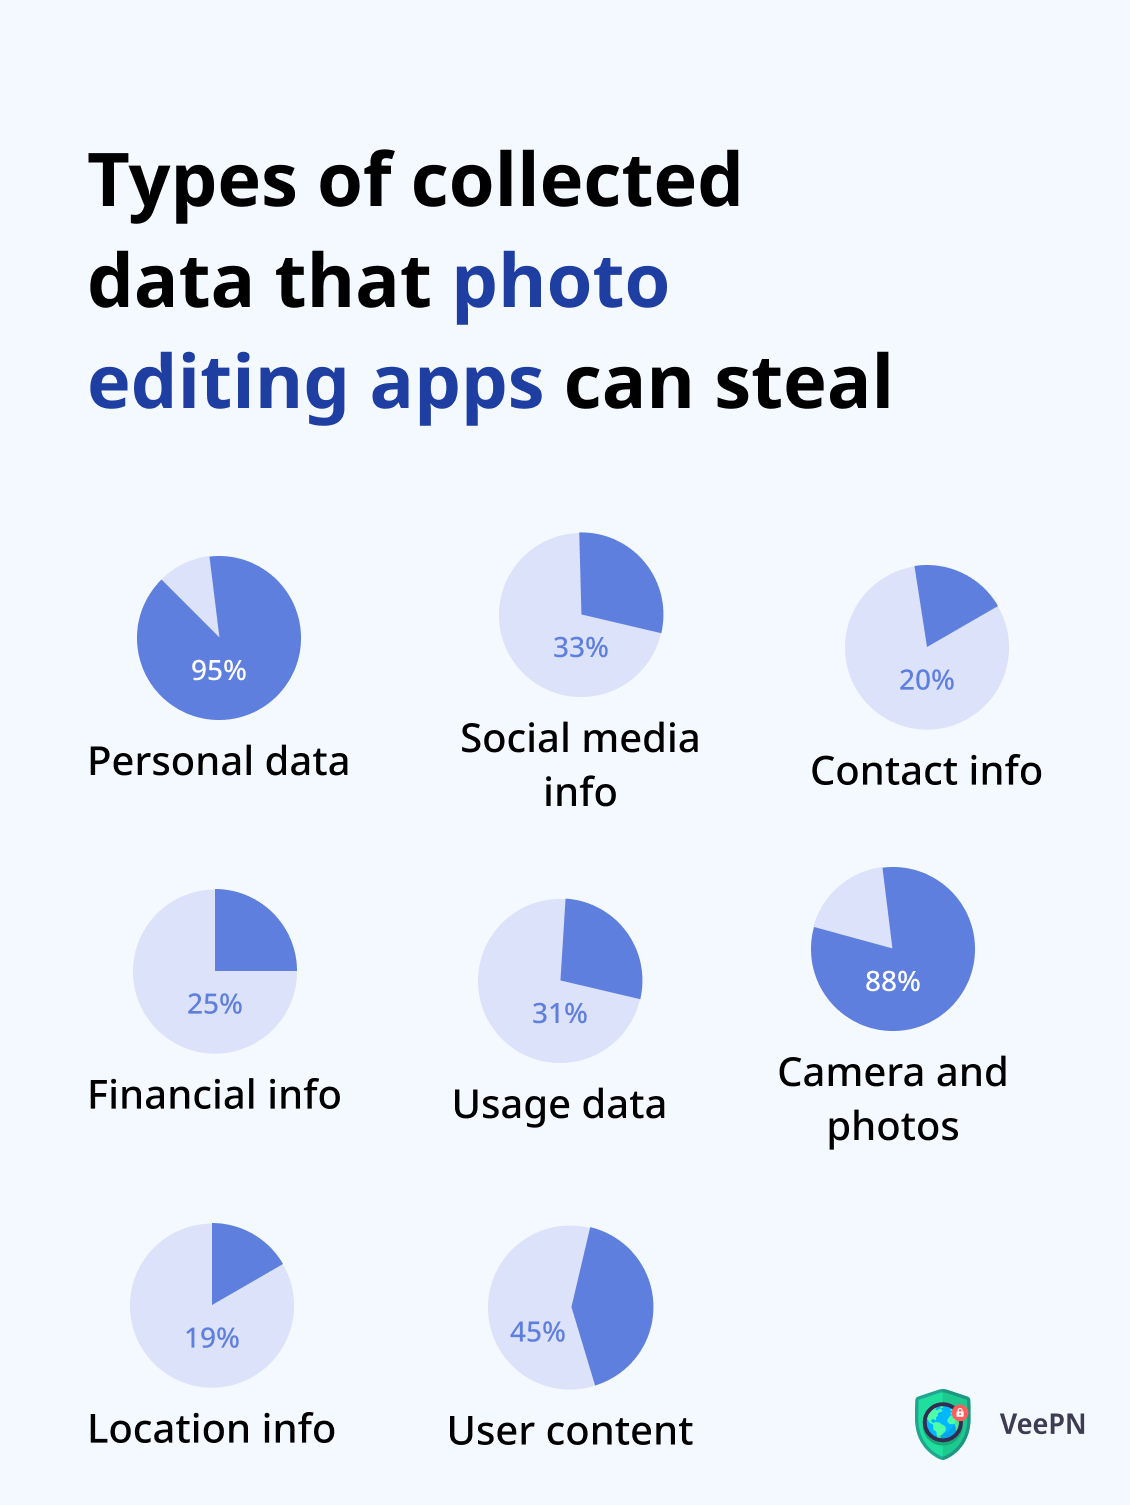 What personal data photo editing apps can steal